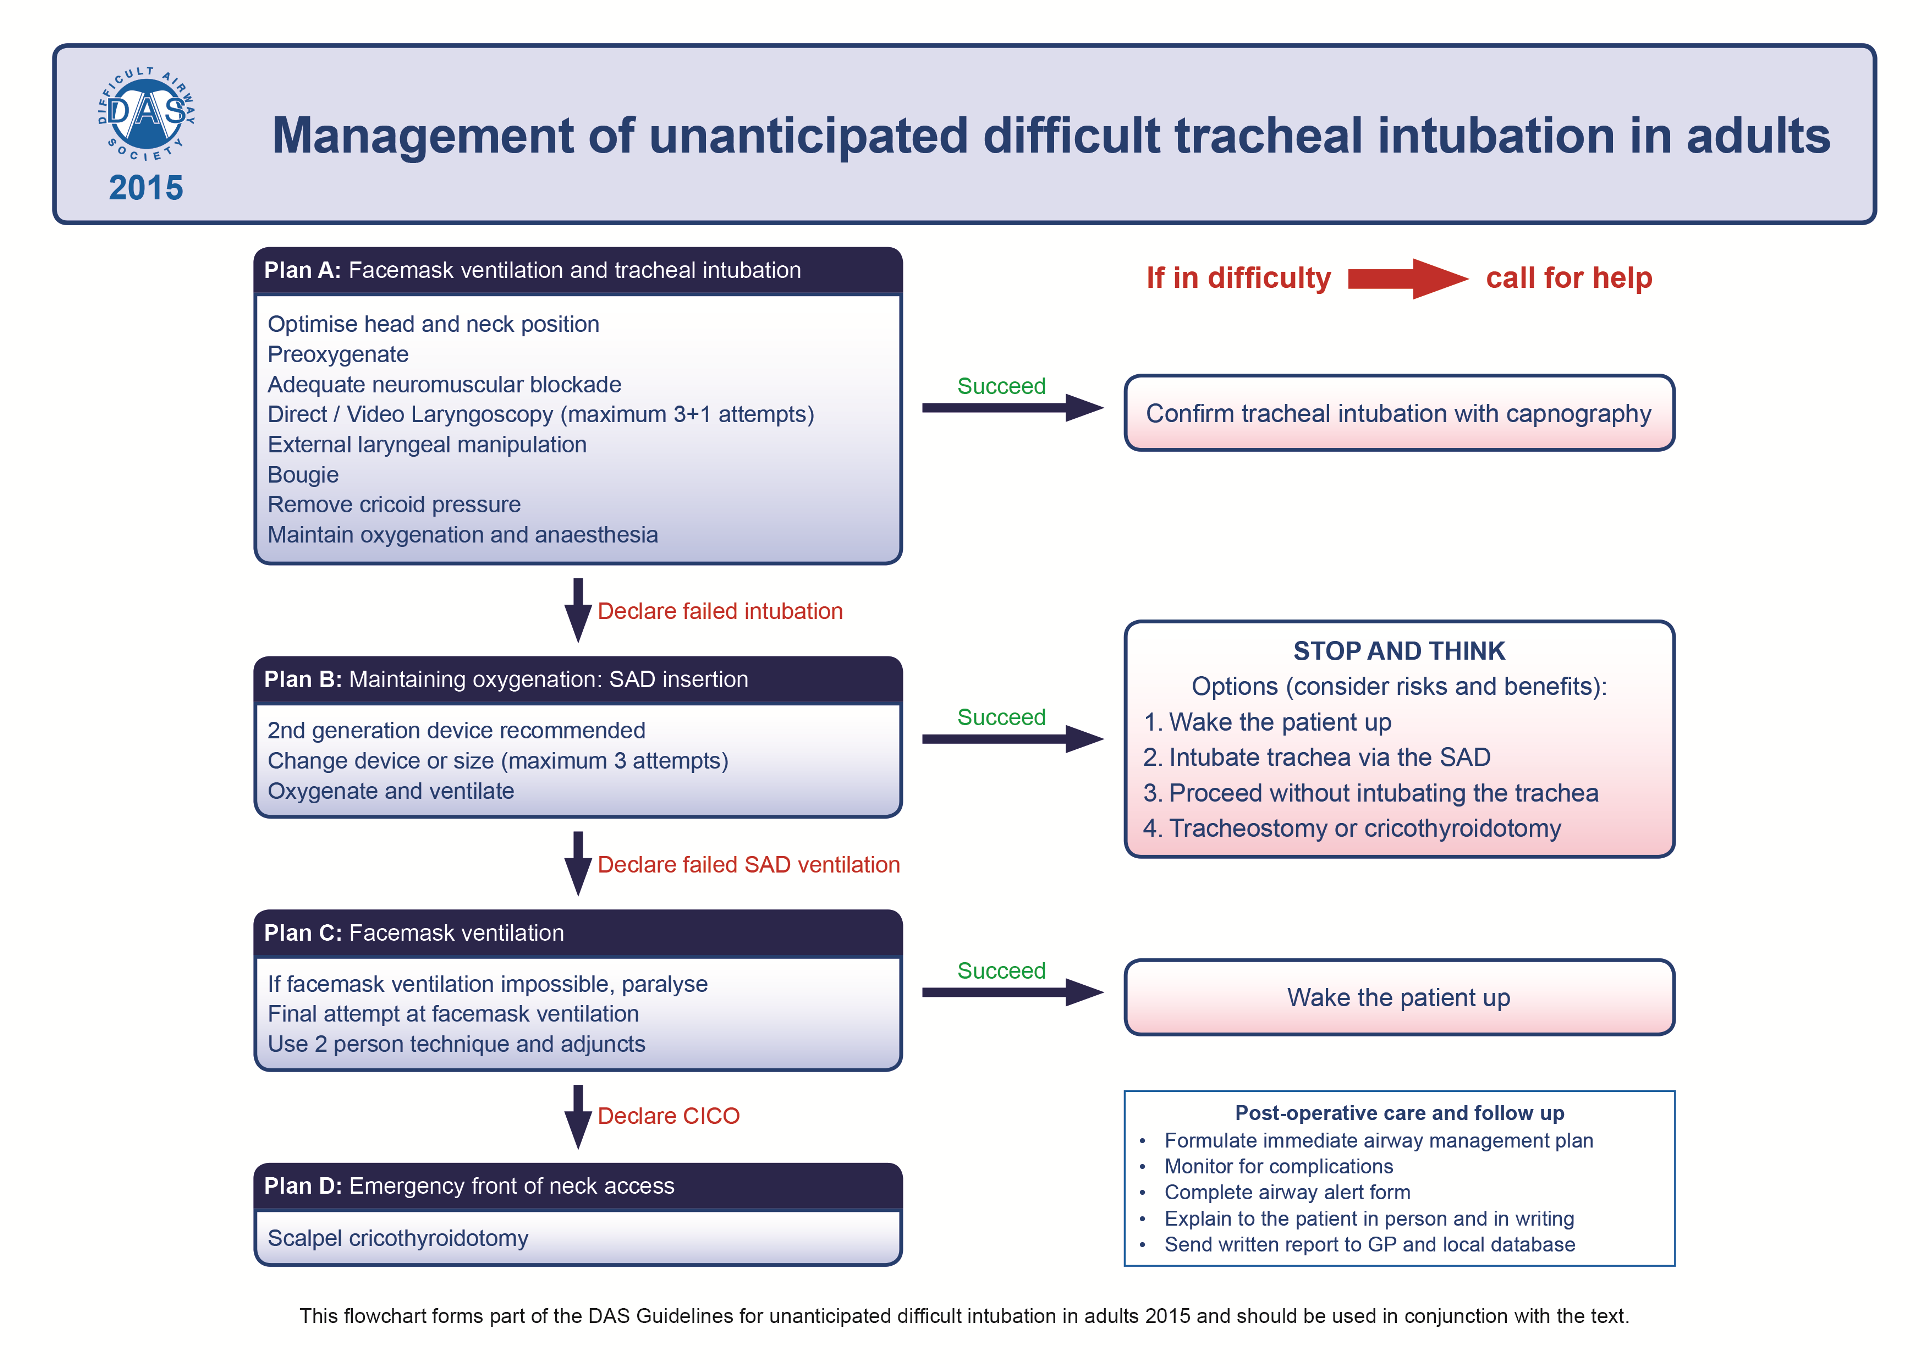 DAS guidelines for management of difficult intubation in adults - Algorithm 1